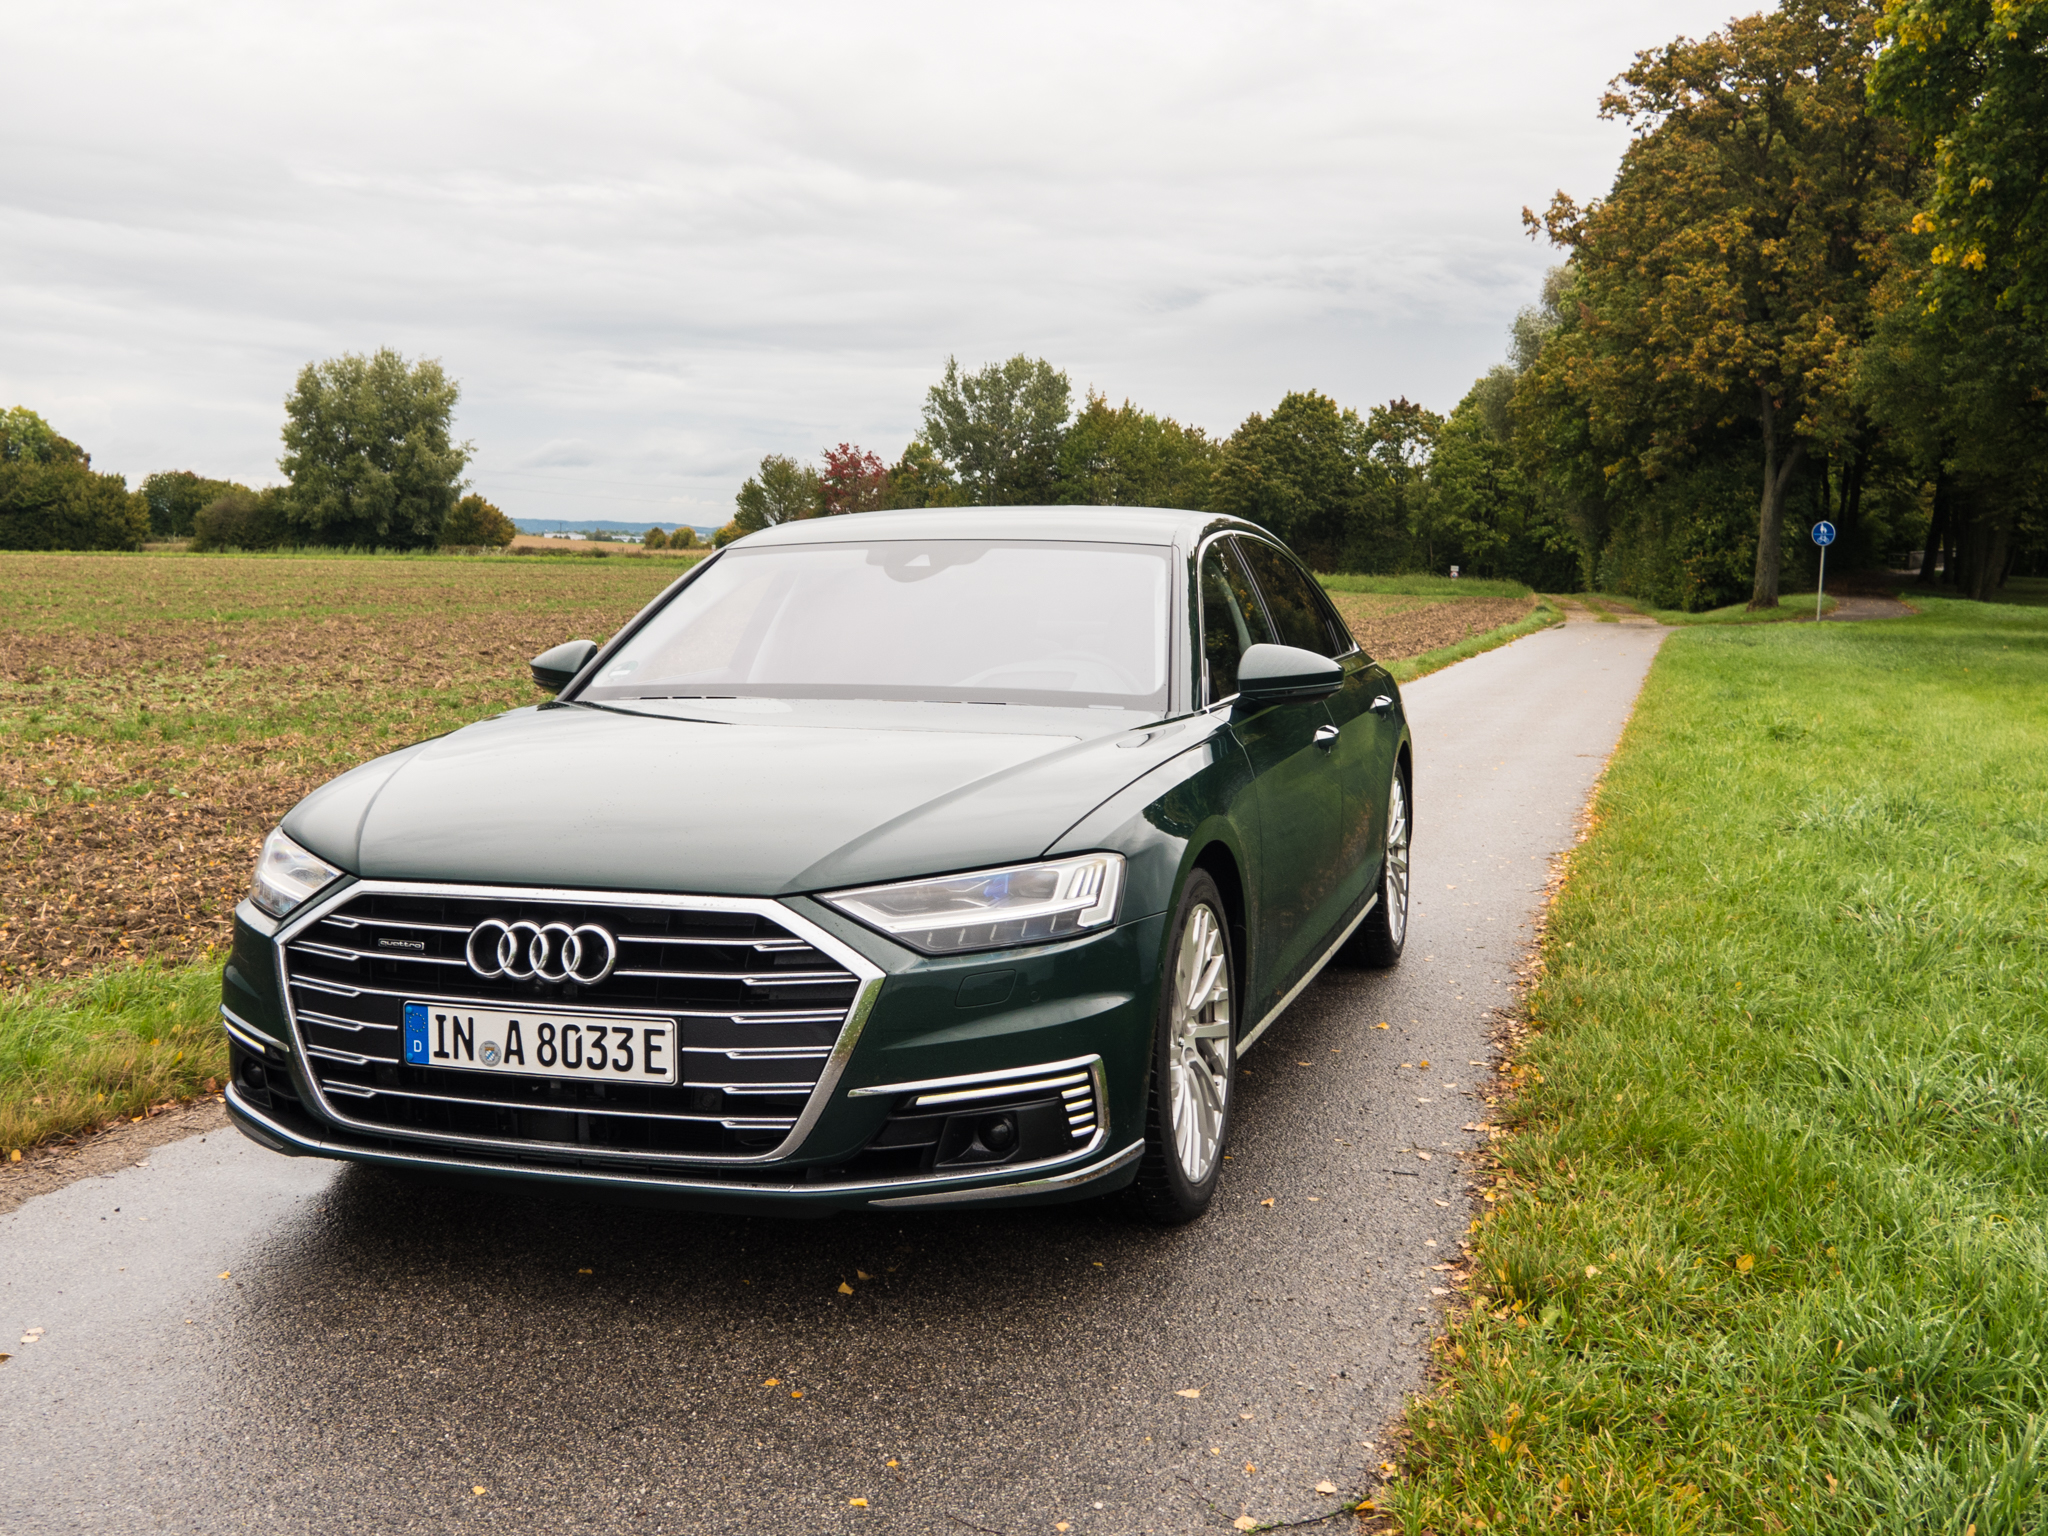 Flagship sedans like the Audi A8 are a dying breed